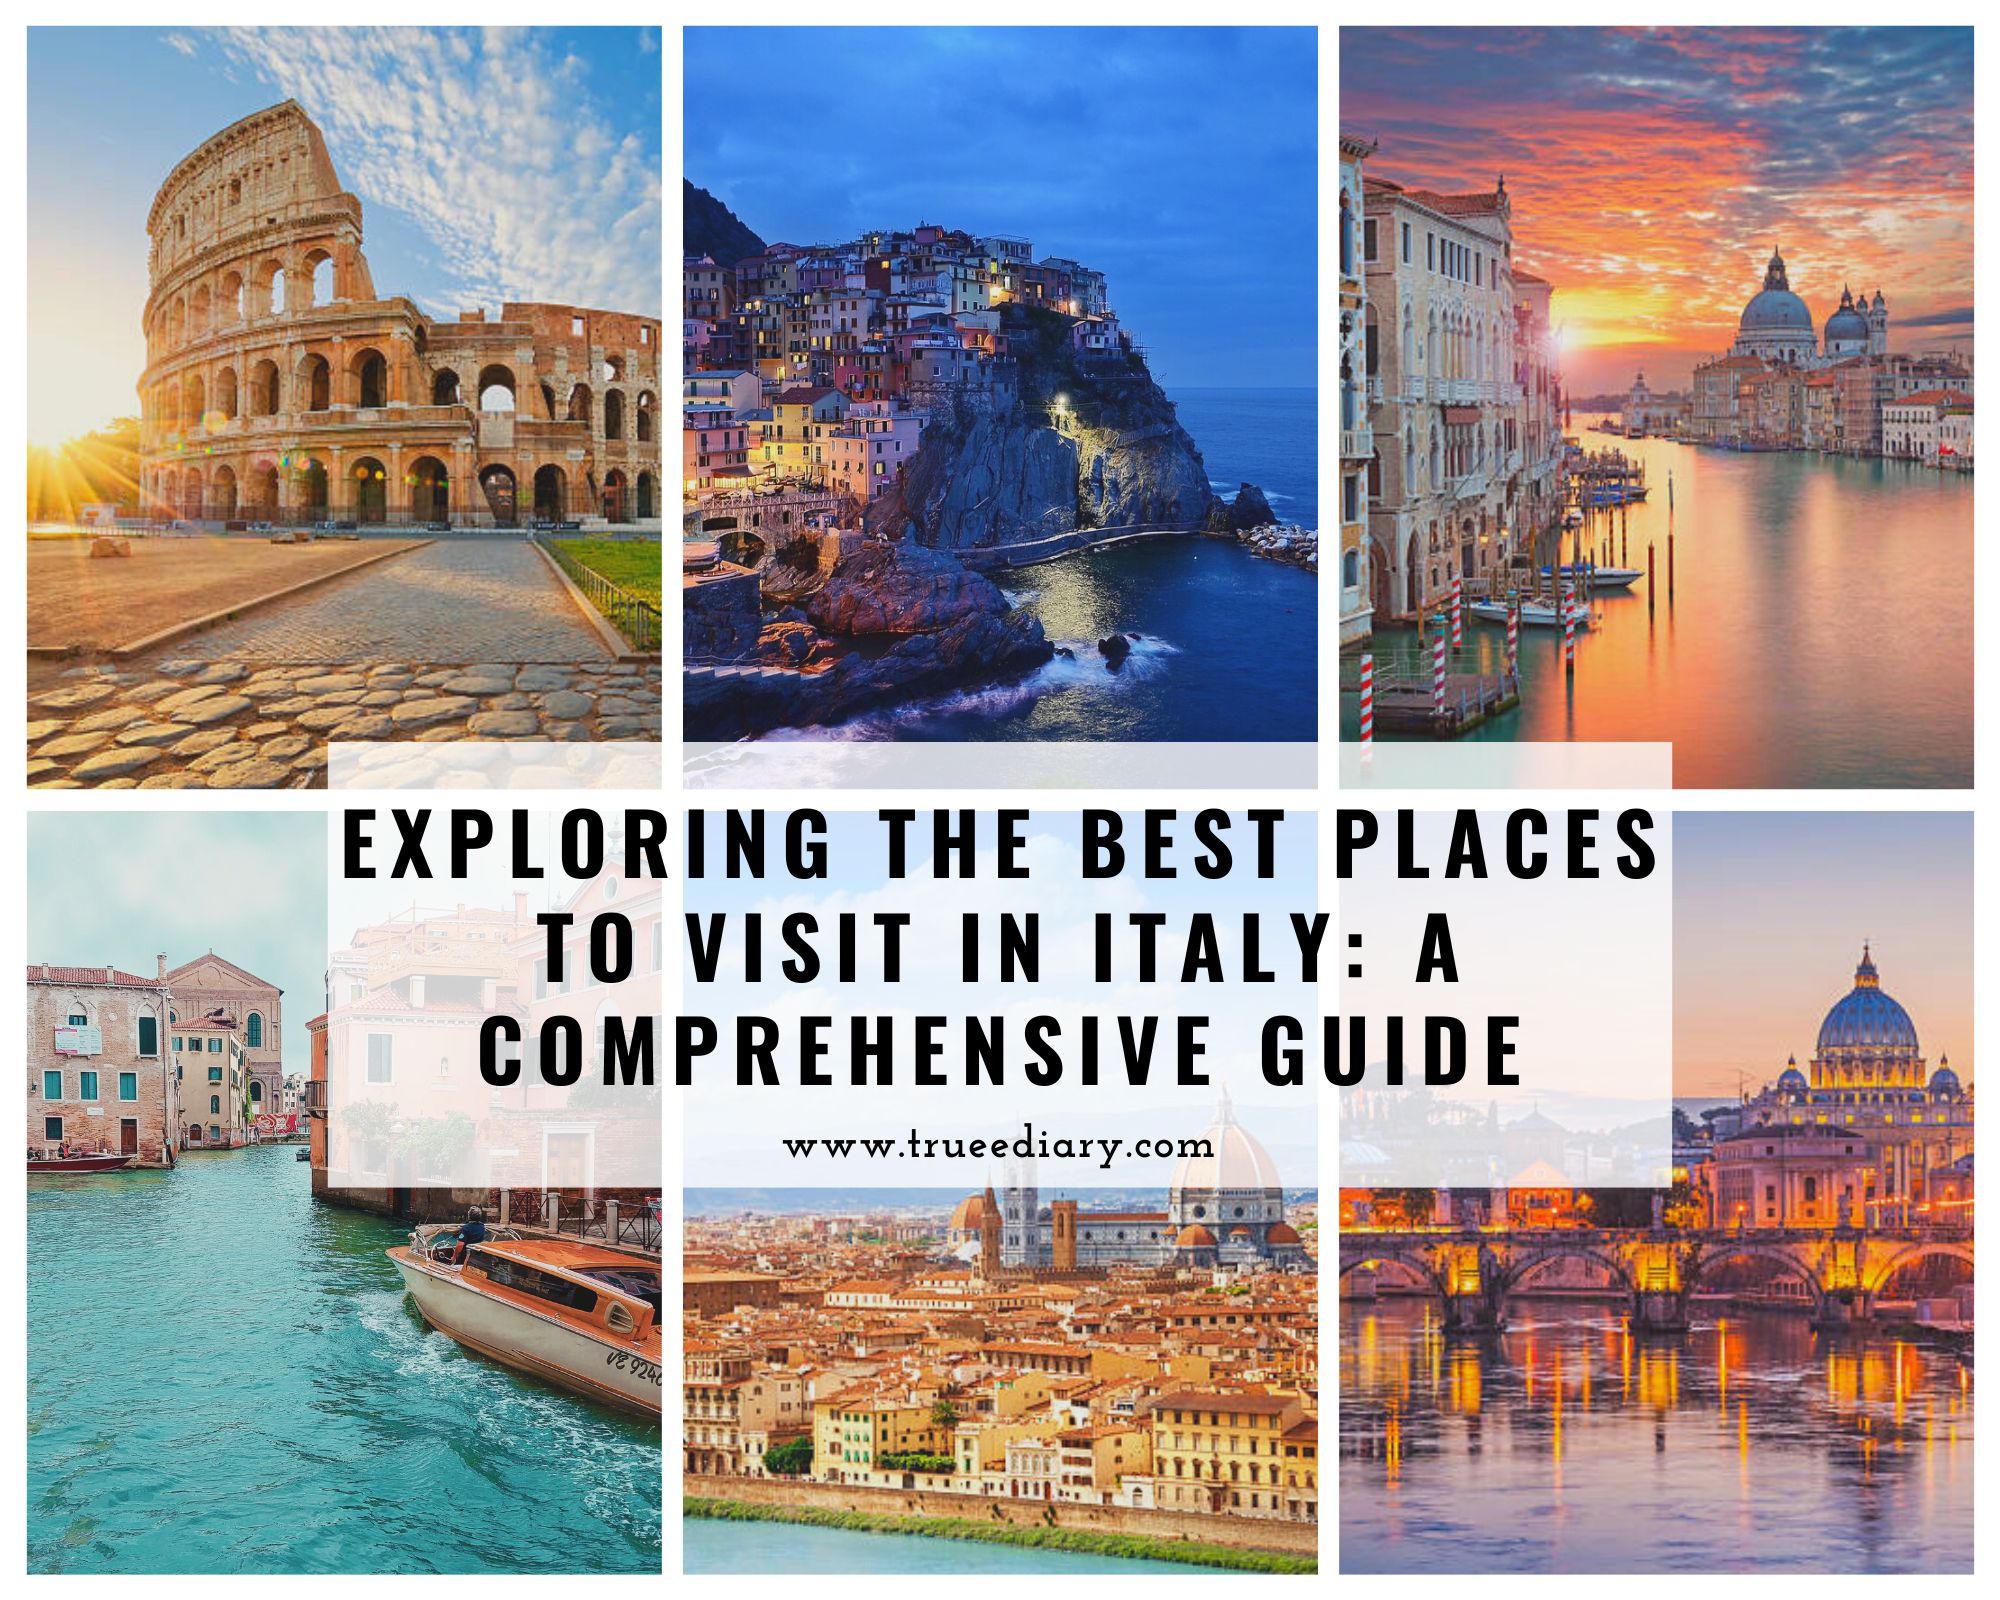 Exploring the Best Places to Visit in Italy: A Comprehensive Guide